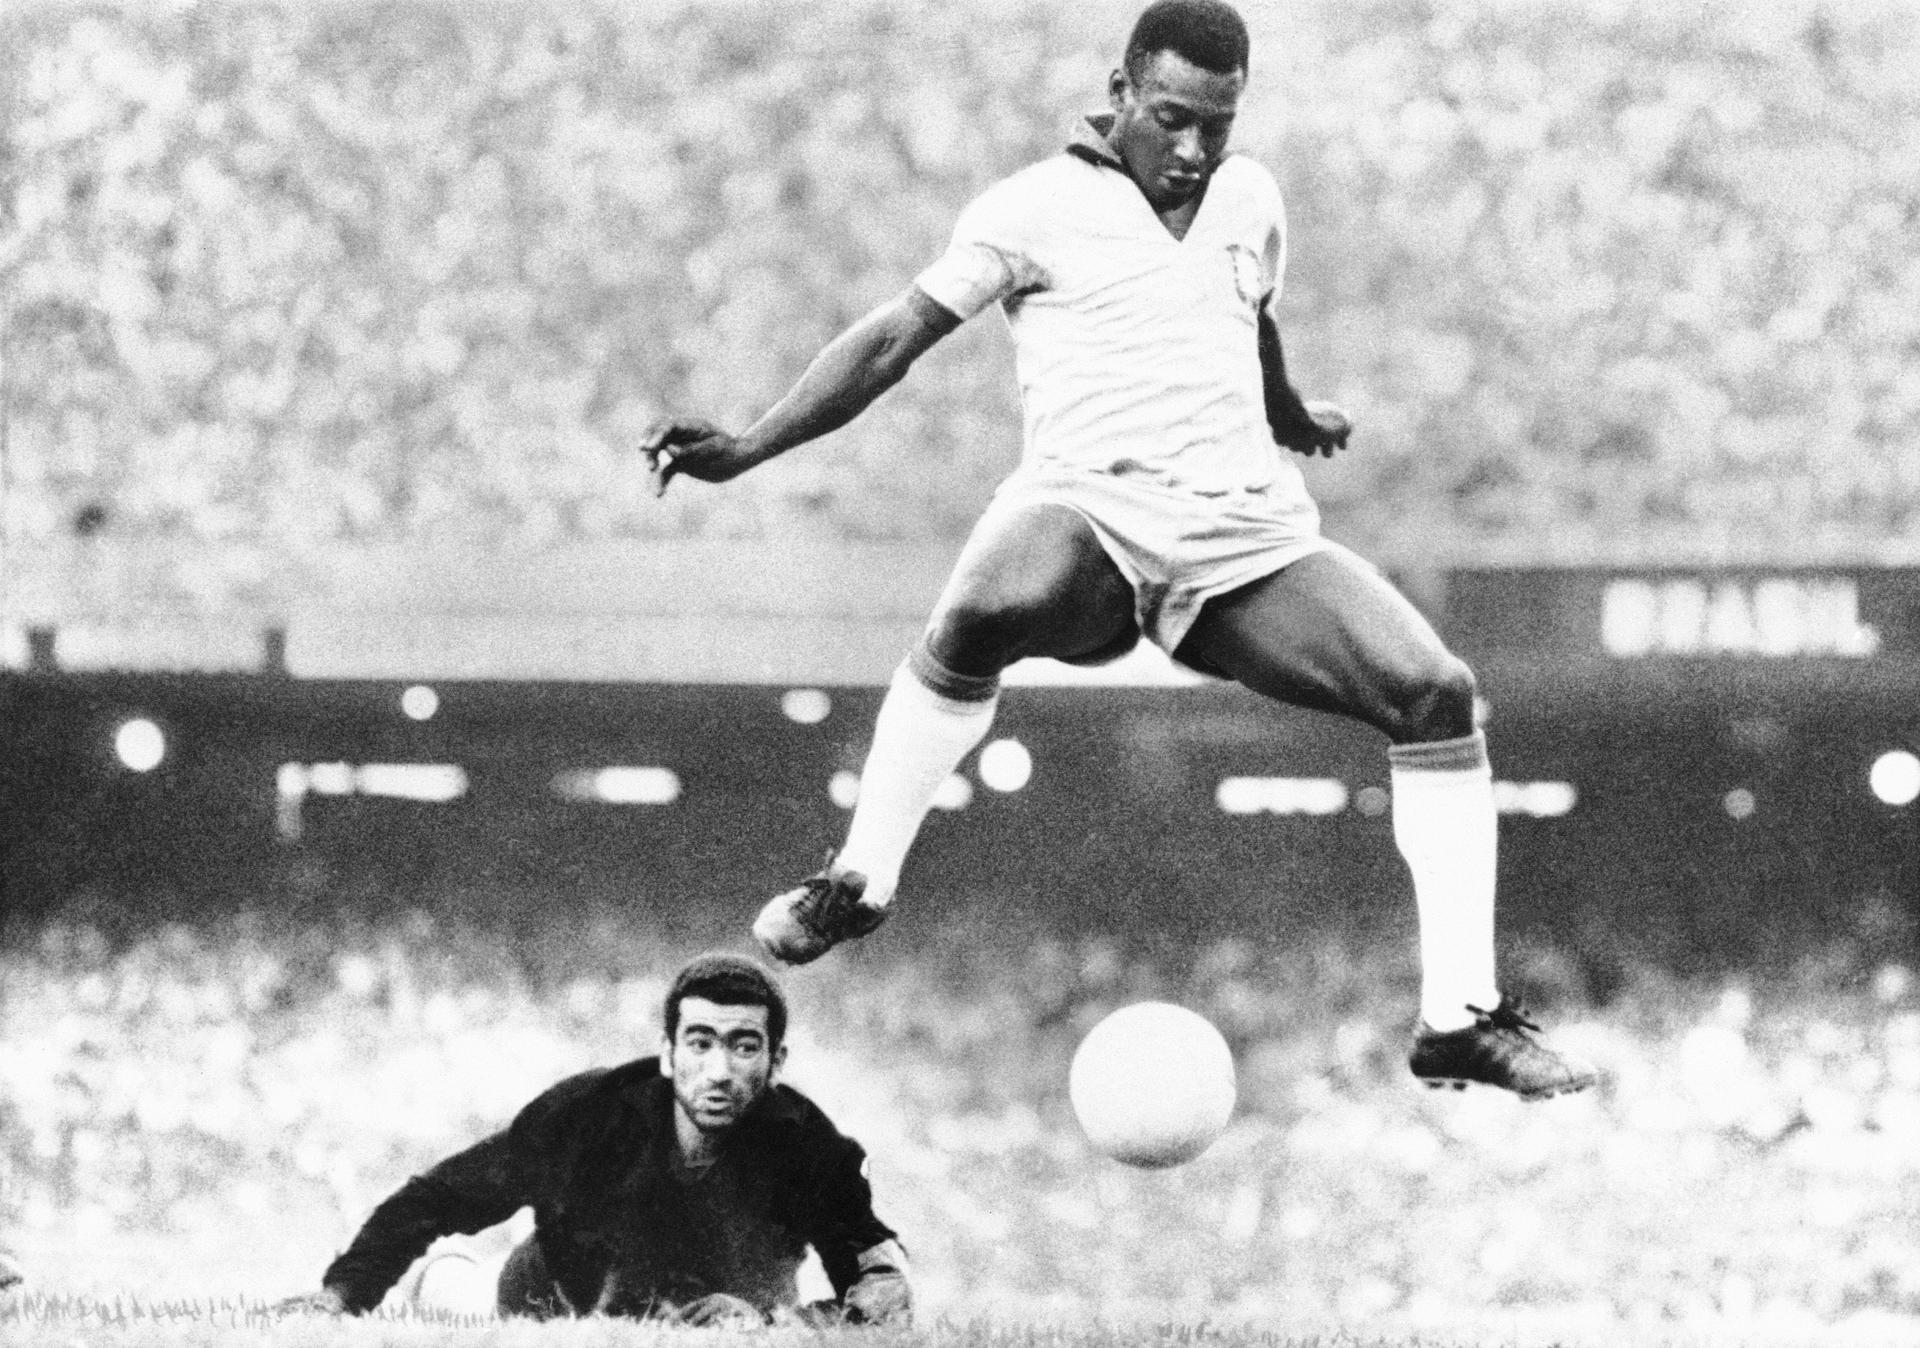 Black-and-white photo of Pele getting ready to shoot a soccer ball into the net